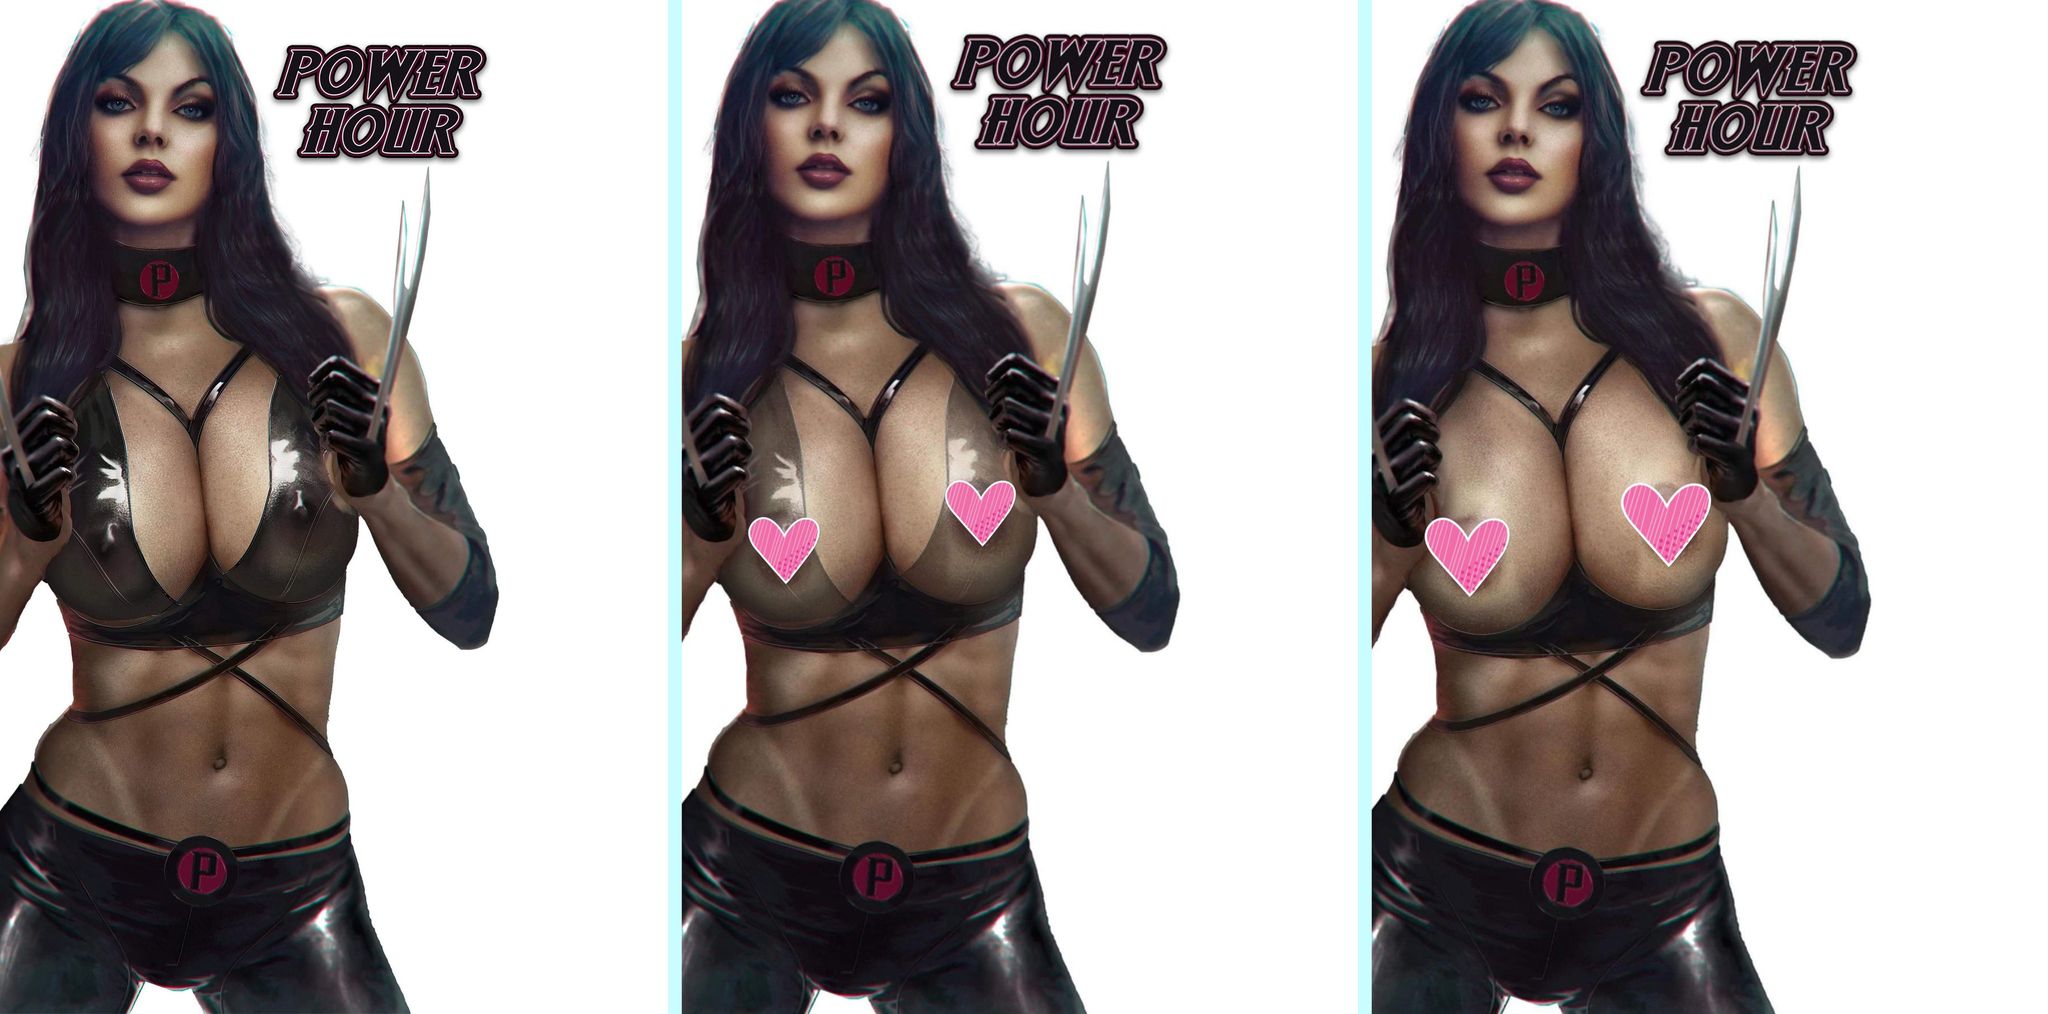 POWER HOUR SHIKARII KNIVES COSPLAY EXCLUSIVE SKETCH VARIANT COVERS